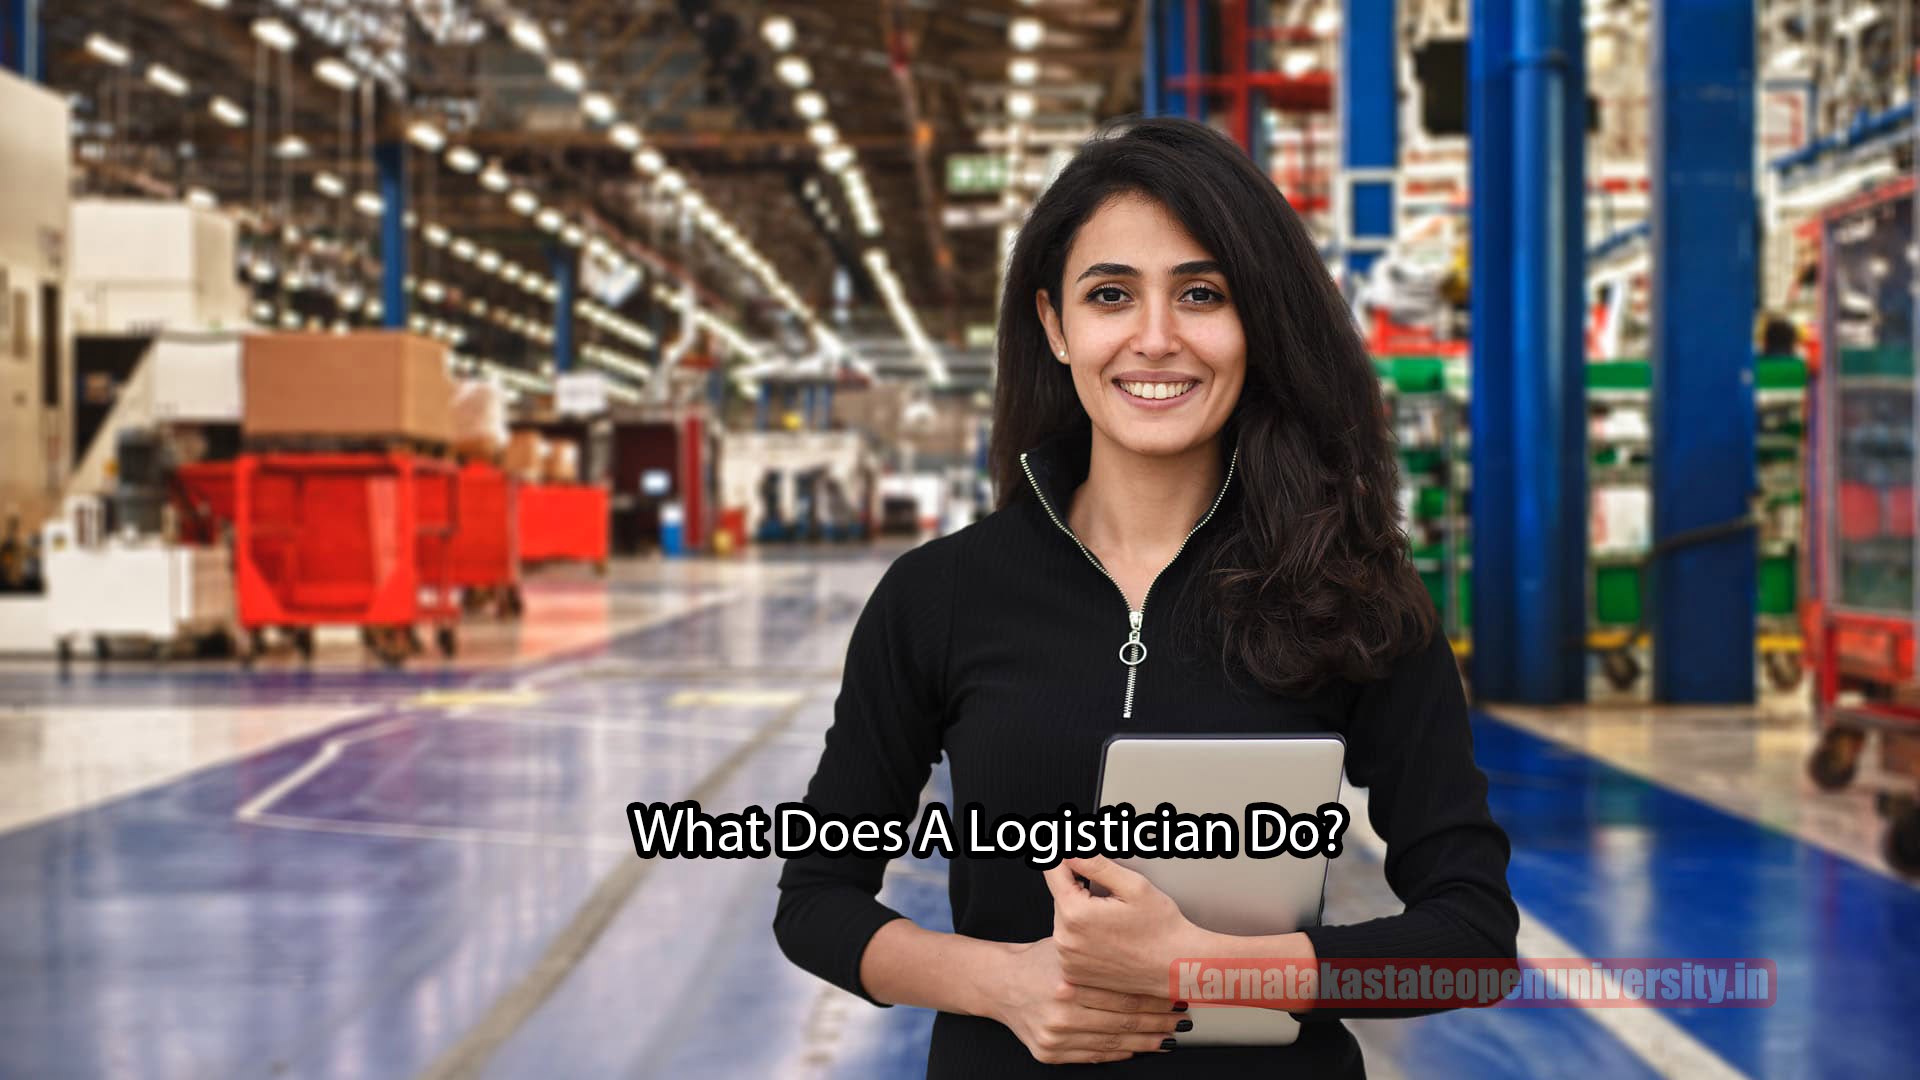 What Does A Logistician Do?